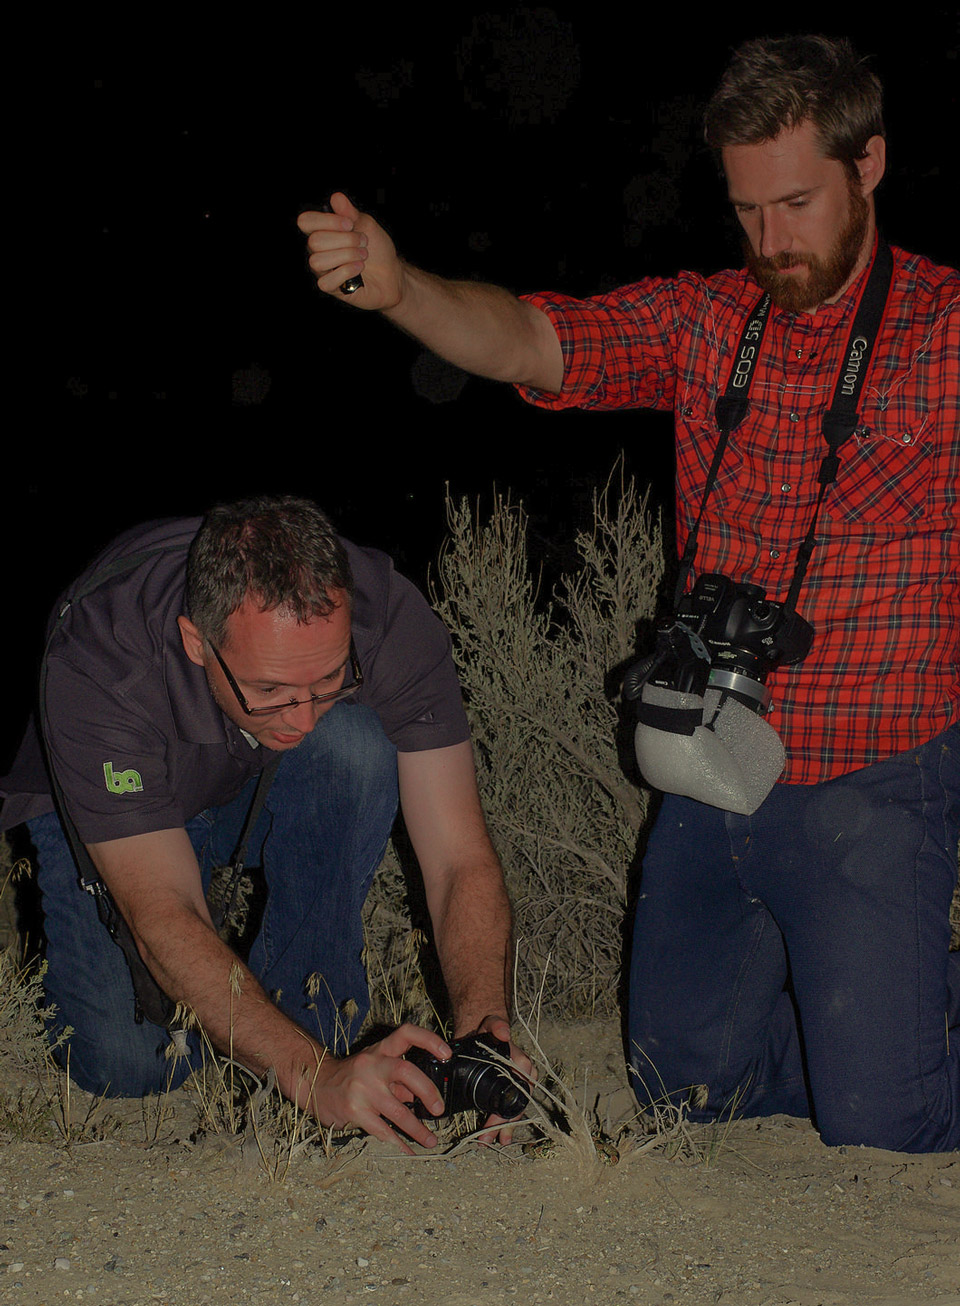 Jamison and Gavin snapping photos iof a Long-nosed Snake.